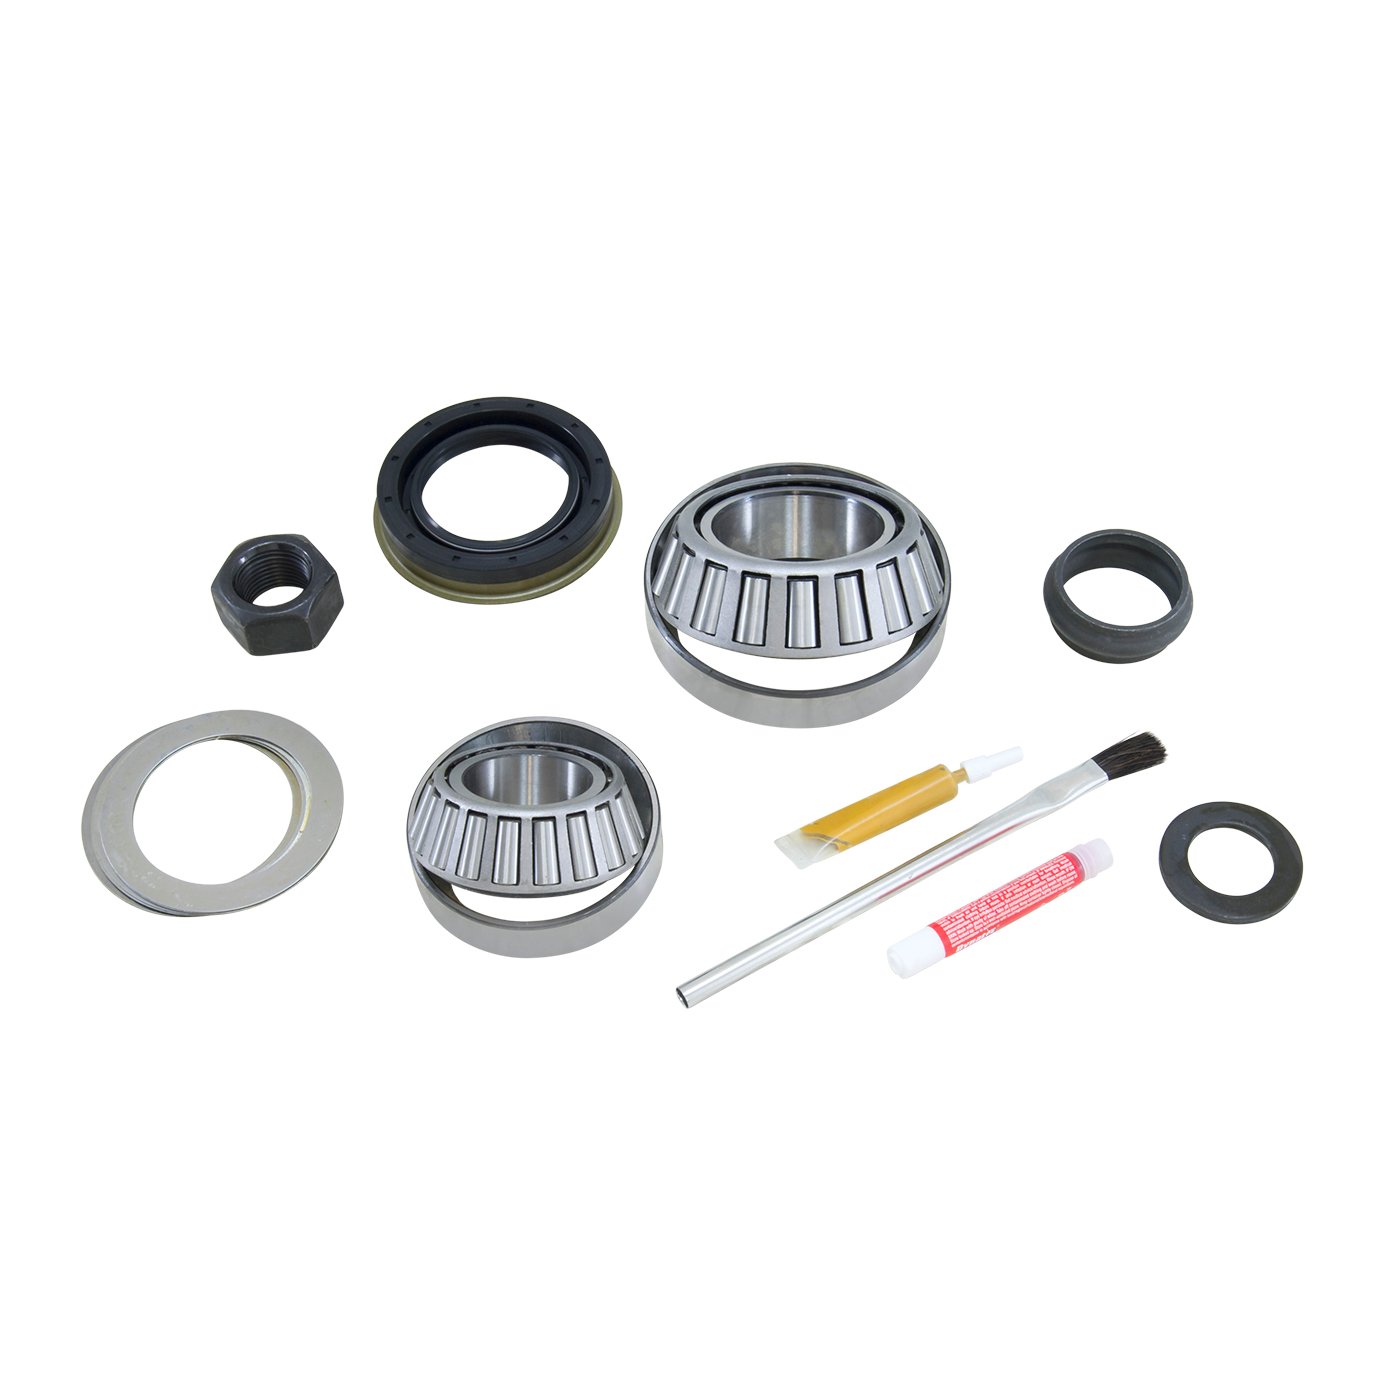 Pinion Install Kit For Dana 27 Differential